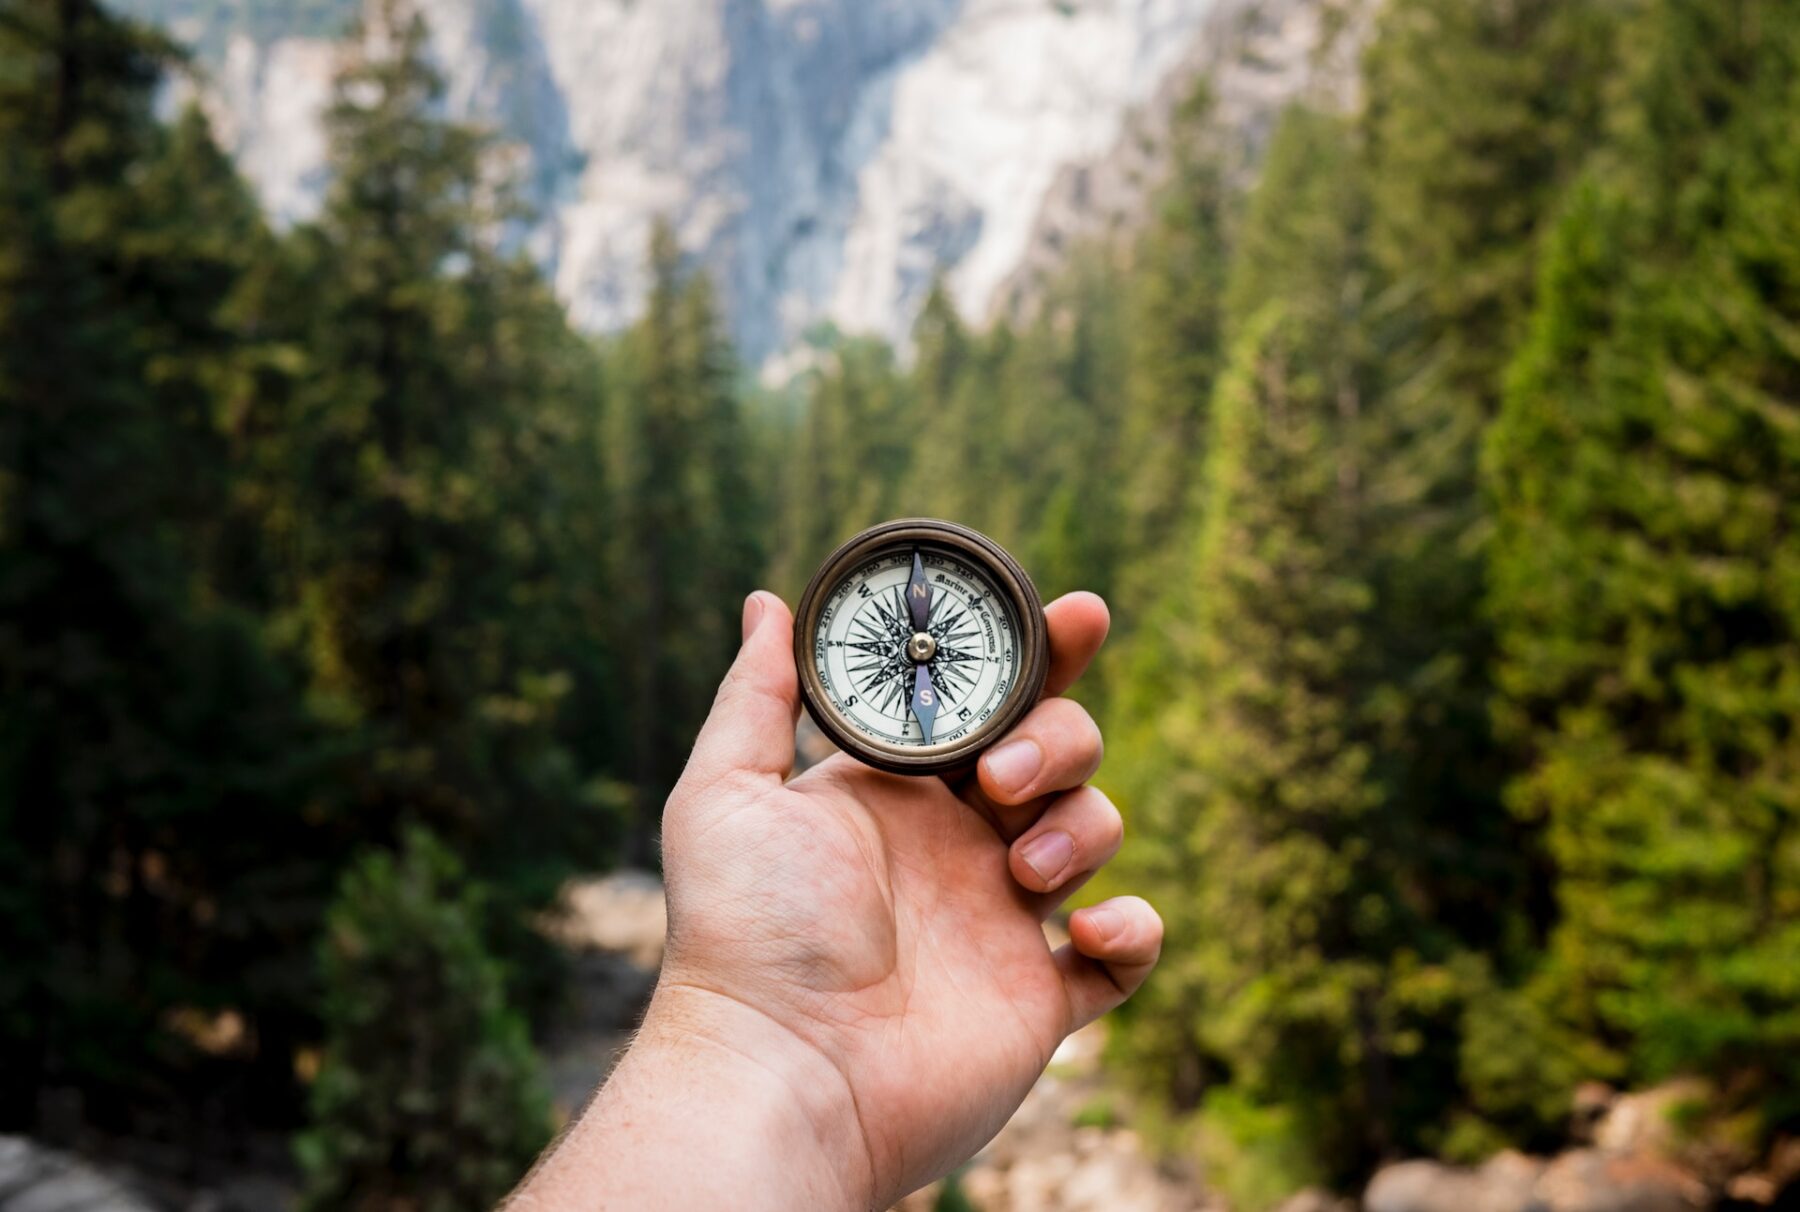 Image of a man holding a compass, an analogy for the foundation of building teams that thrive.